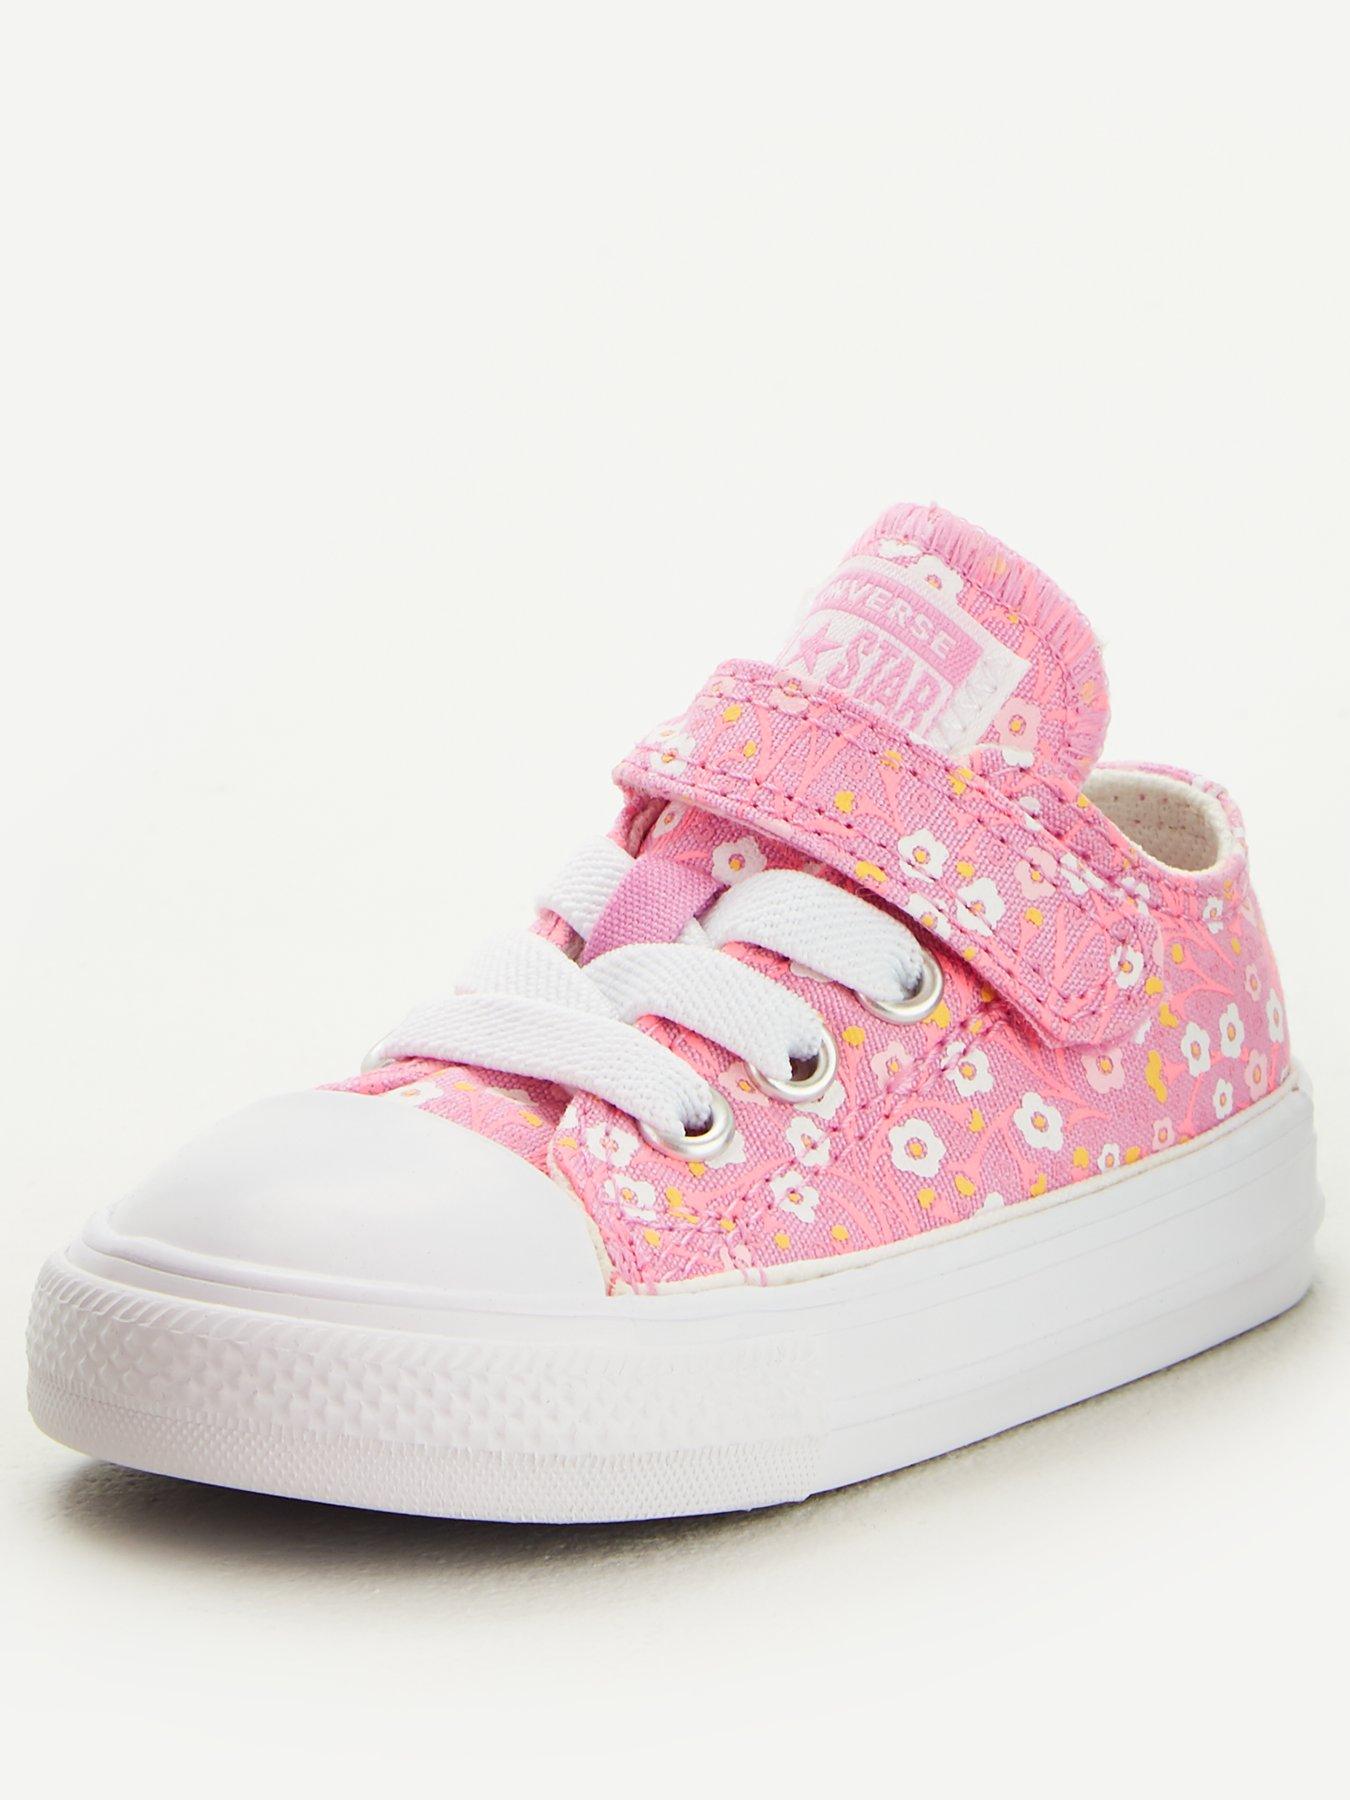 where to buy baby converse